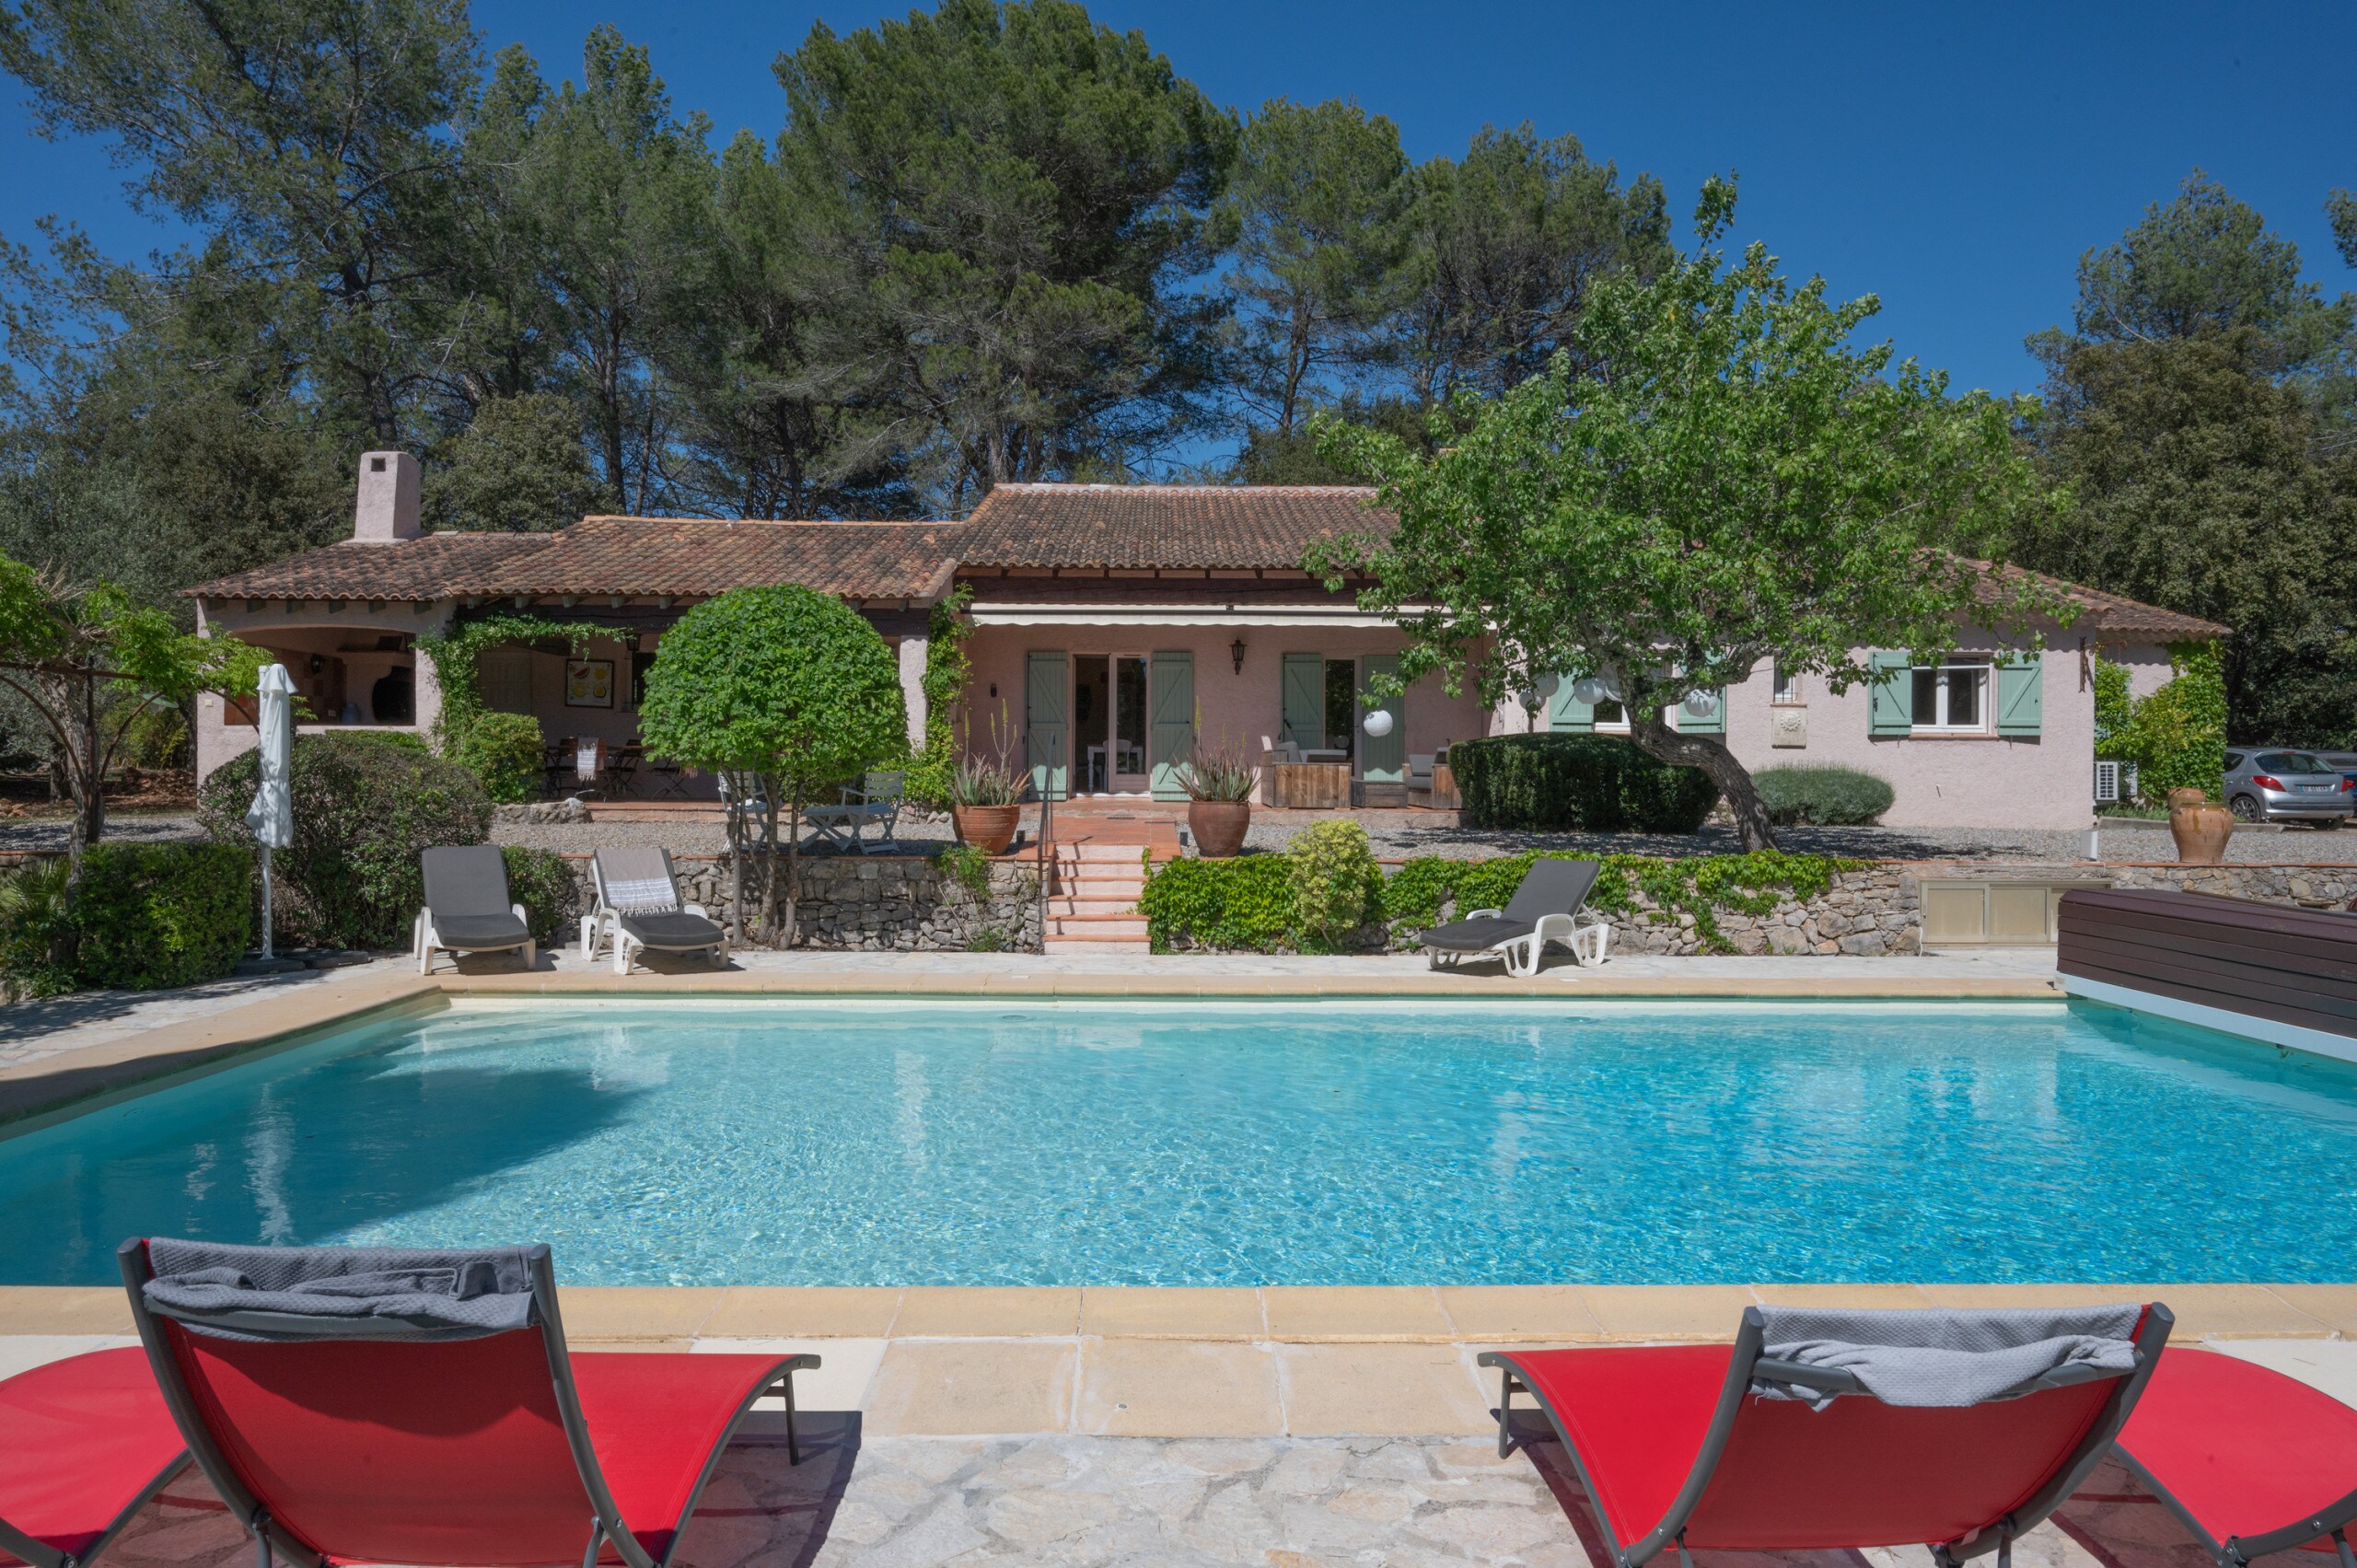 Take a refreshing dip in our heated private pool, unwind on the sun terrace, and enjoy 'al fresco' meals on the covered terrace at Mas de Charles, Lorgues, Provence.